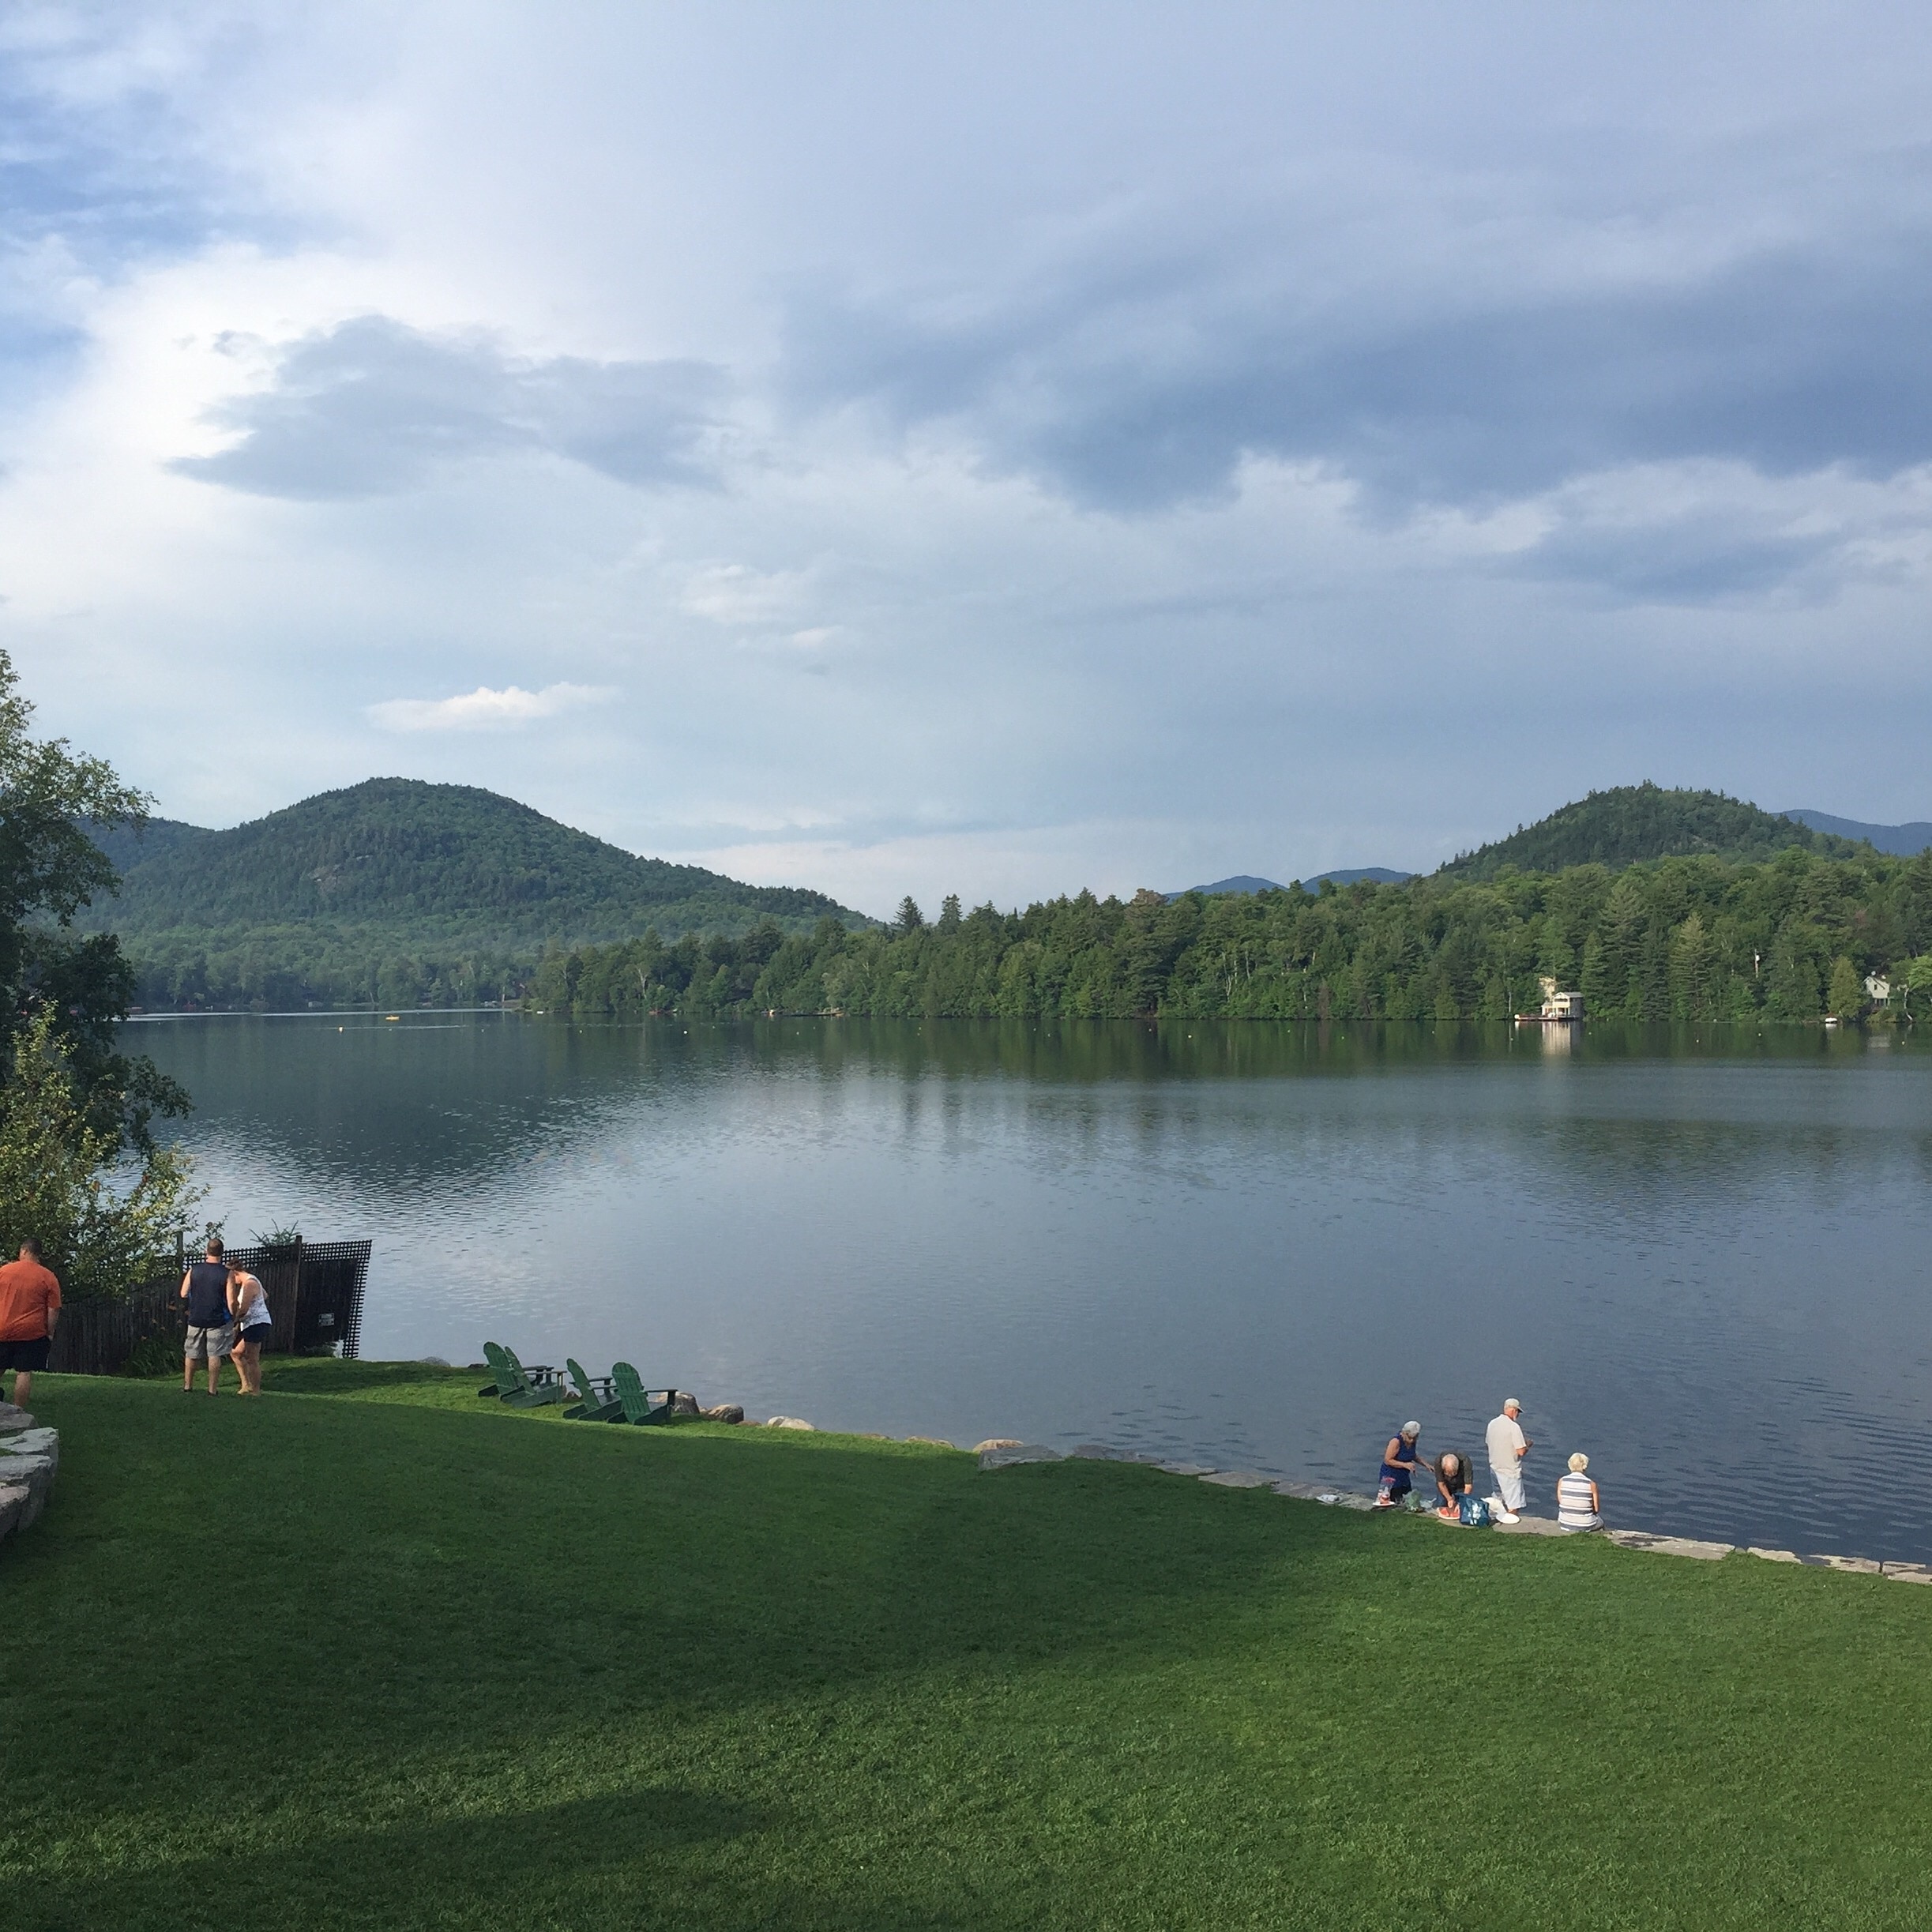 Lake Placid and neighboring Mirror Lake are beautifully situated in the Adirondack Mountains. The town's Main Street is lined with charming shops and restaurants!